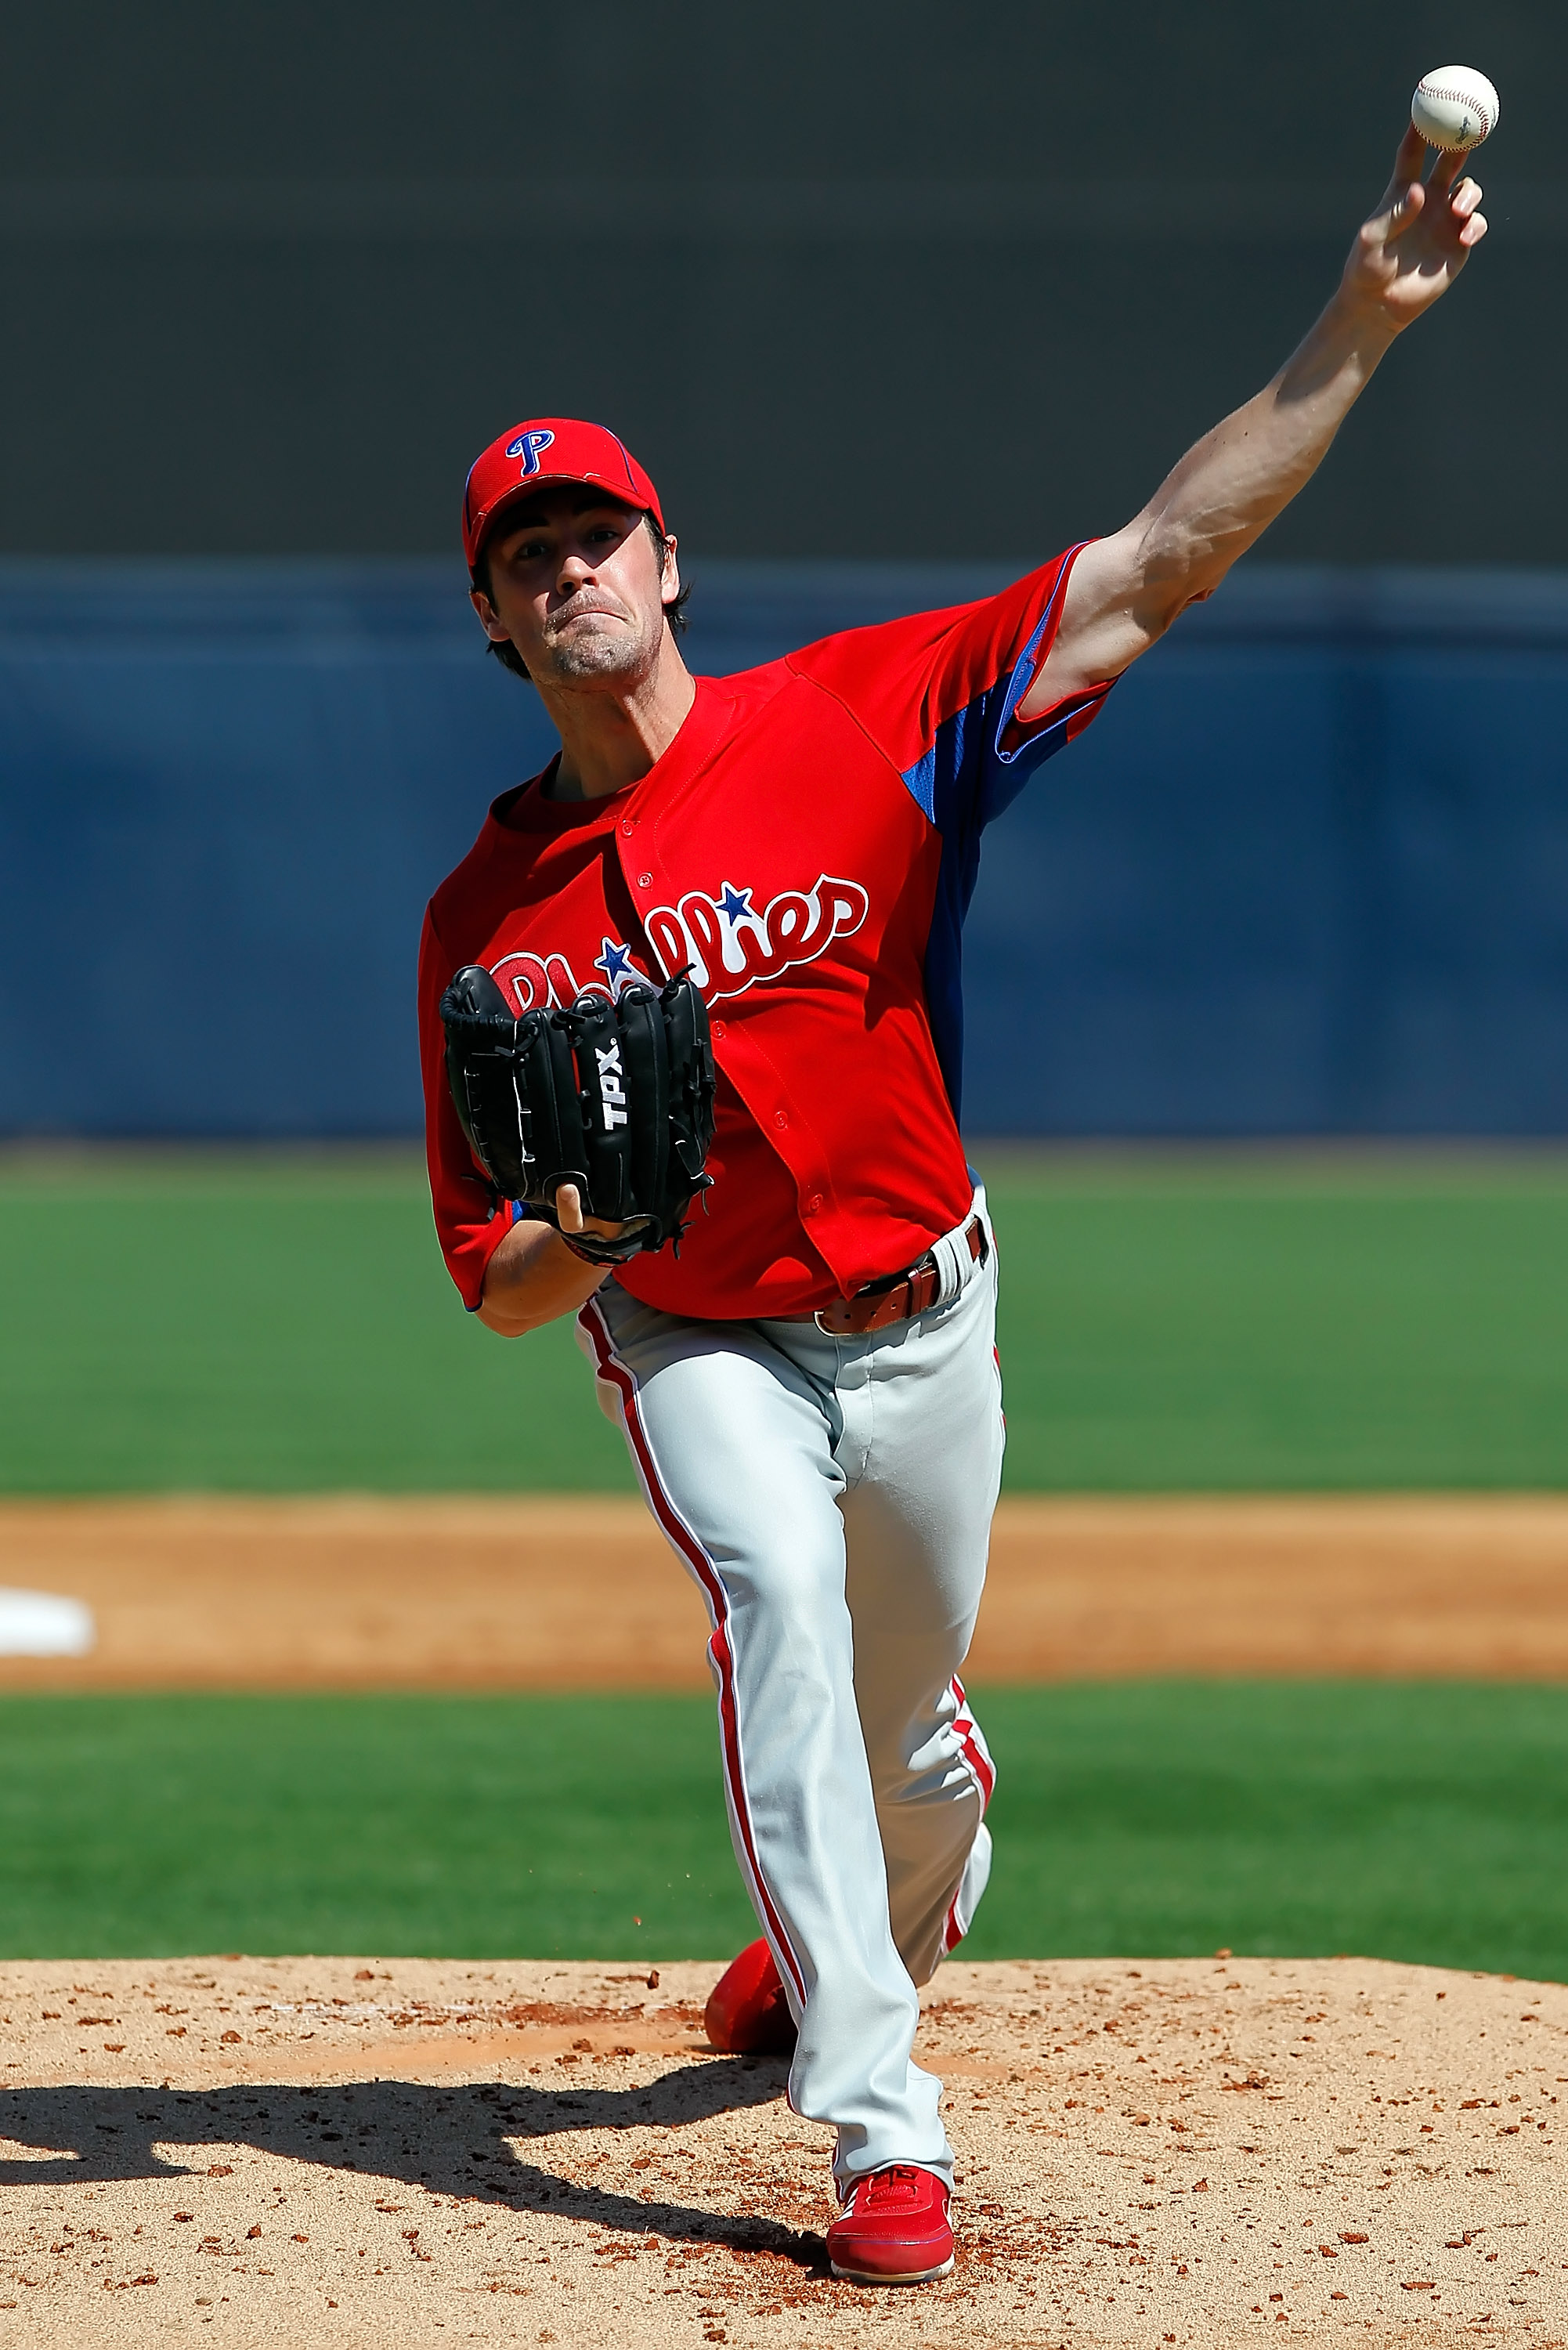 TAMPA, FL - FEBRUARY 26:  Pitcher Cole Hamels #35 of the Philadelphia Phillies pitches against the New York Yankees during a Grapefruit League Spring Training Game at George M. Steinbrenner Field on February 26, 2011 in Tampa, Florida.  (Photo by J. Meric